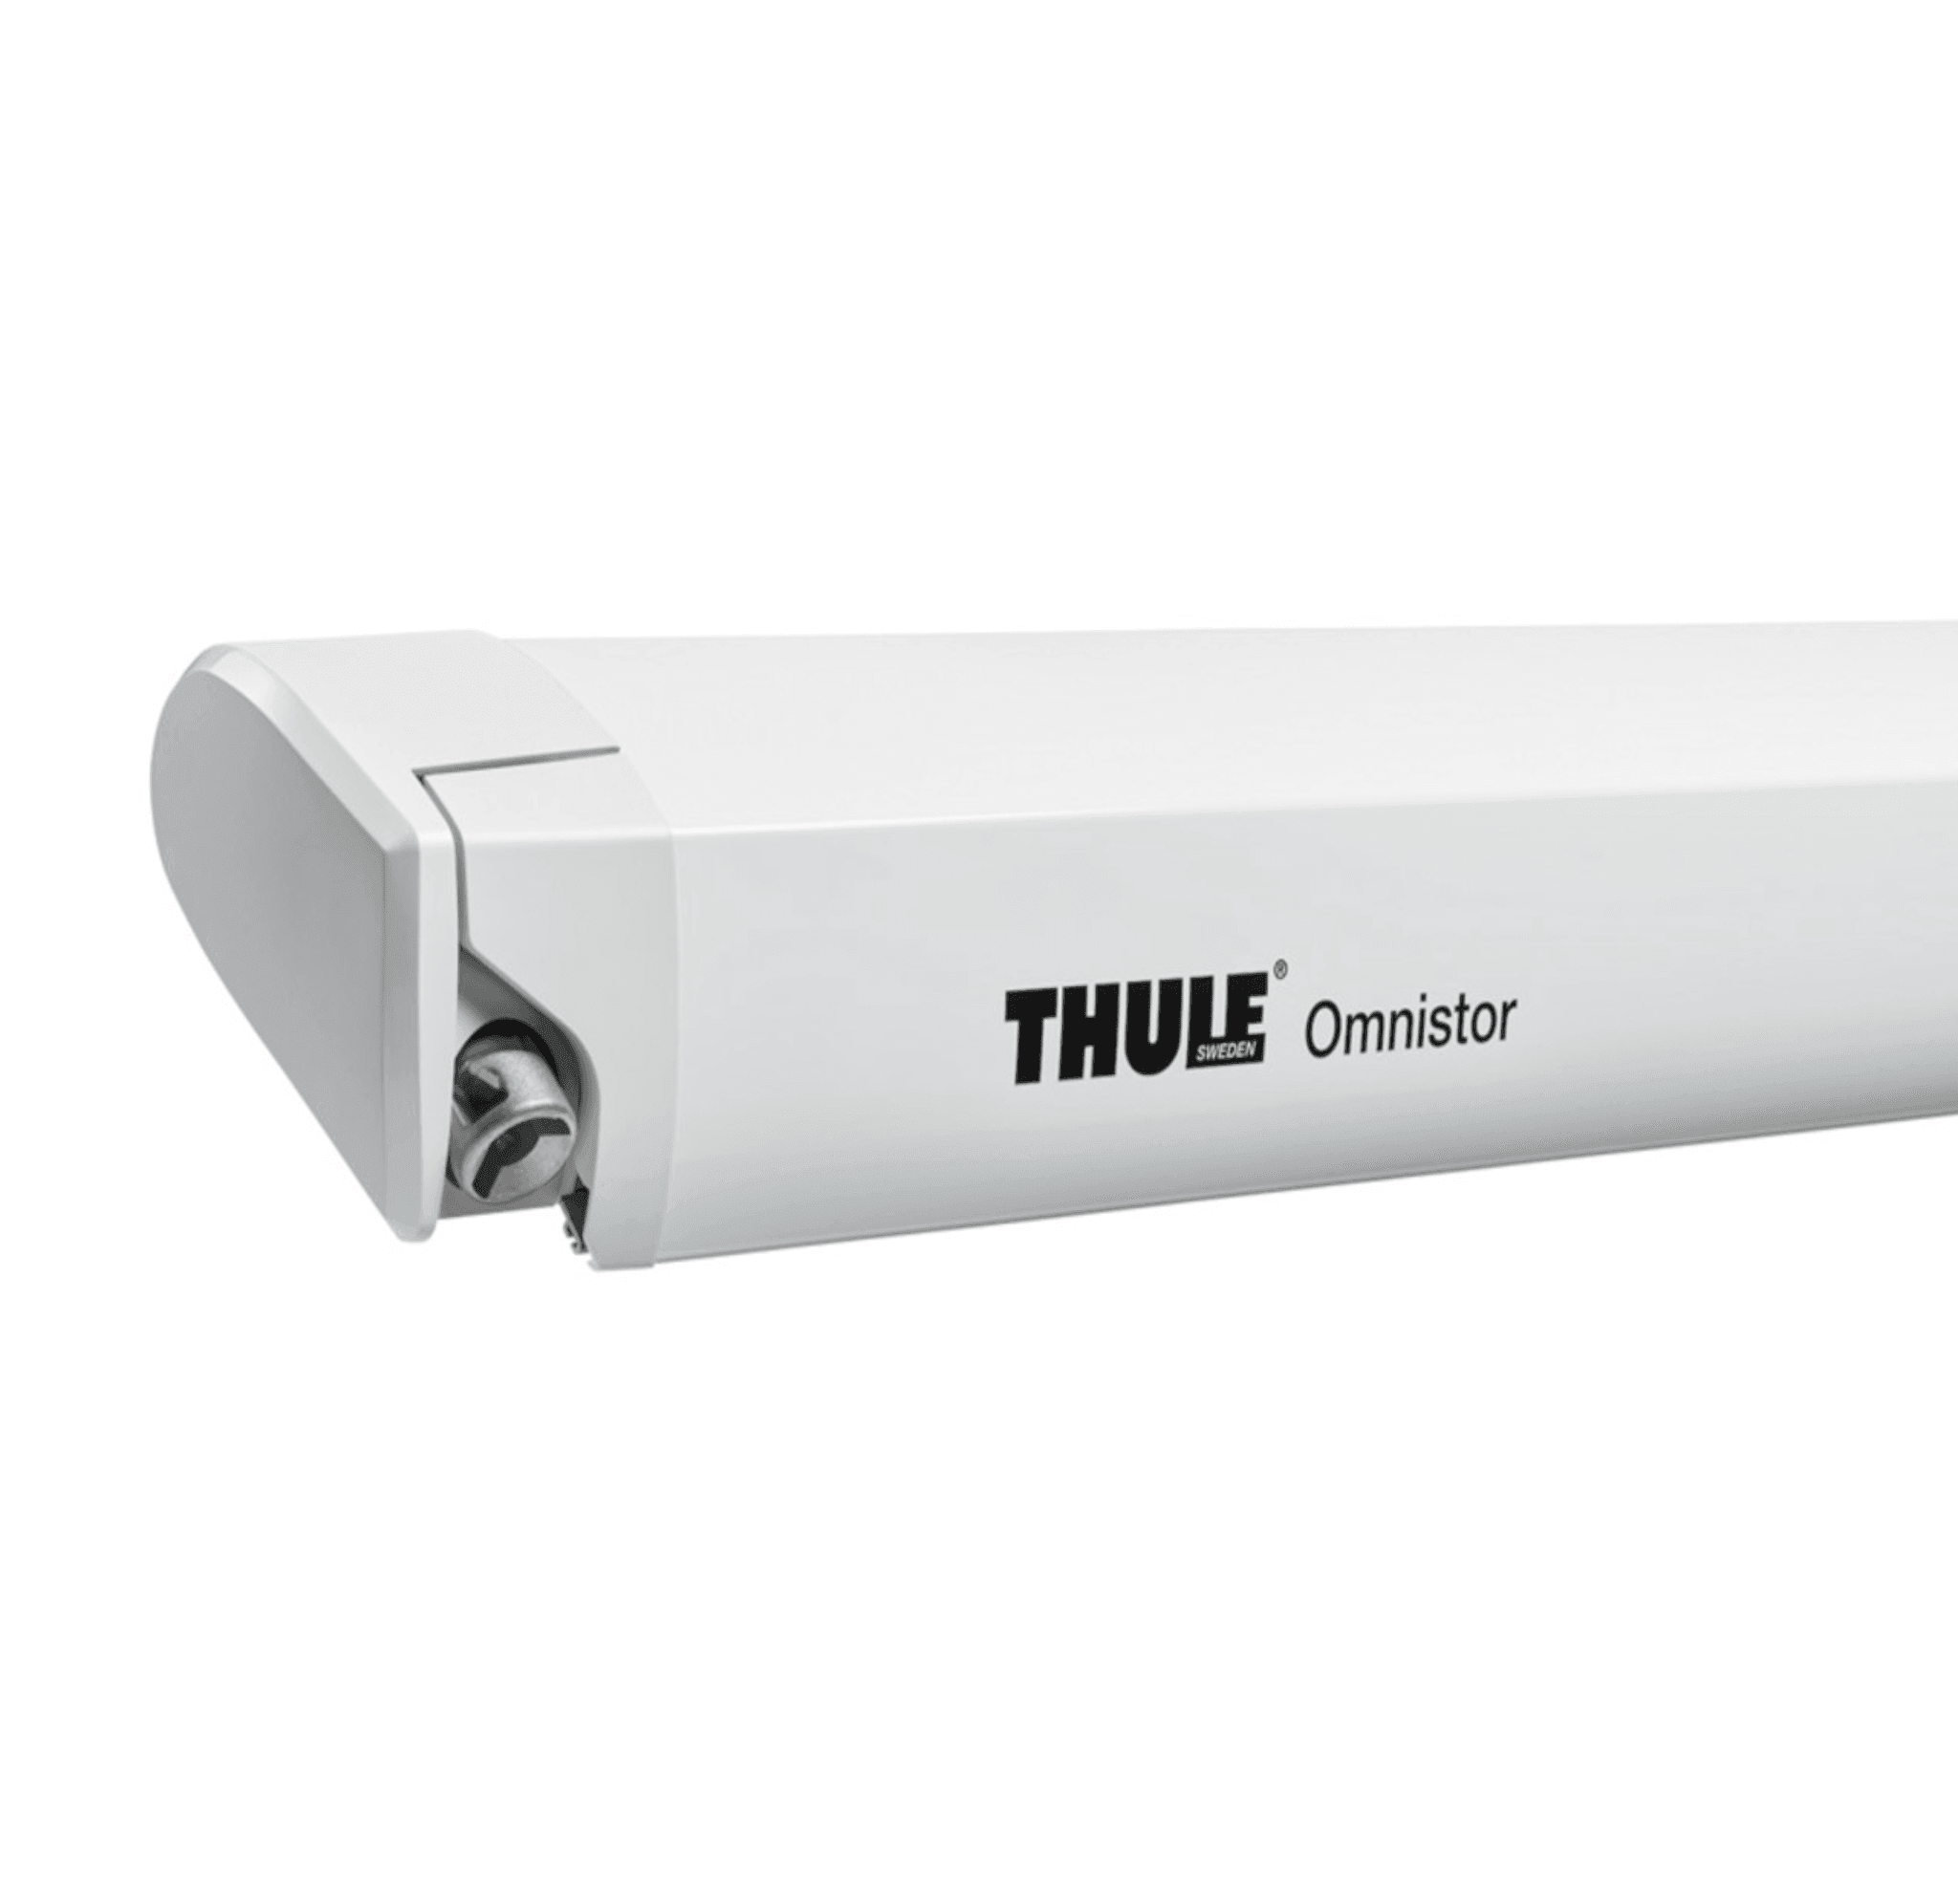 Thule 6300 Awning - Aussie Traveller